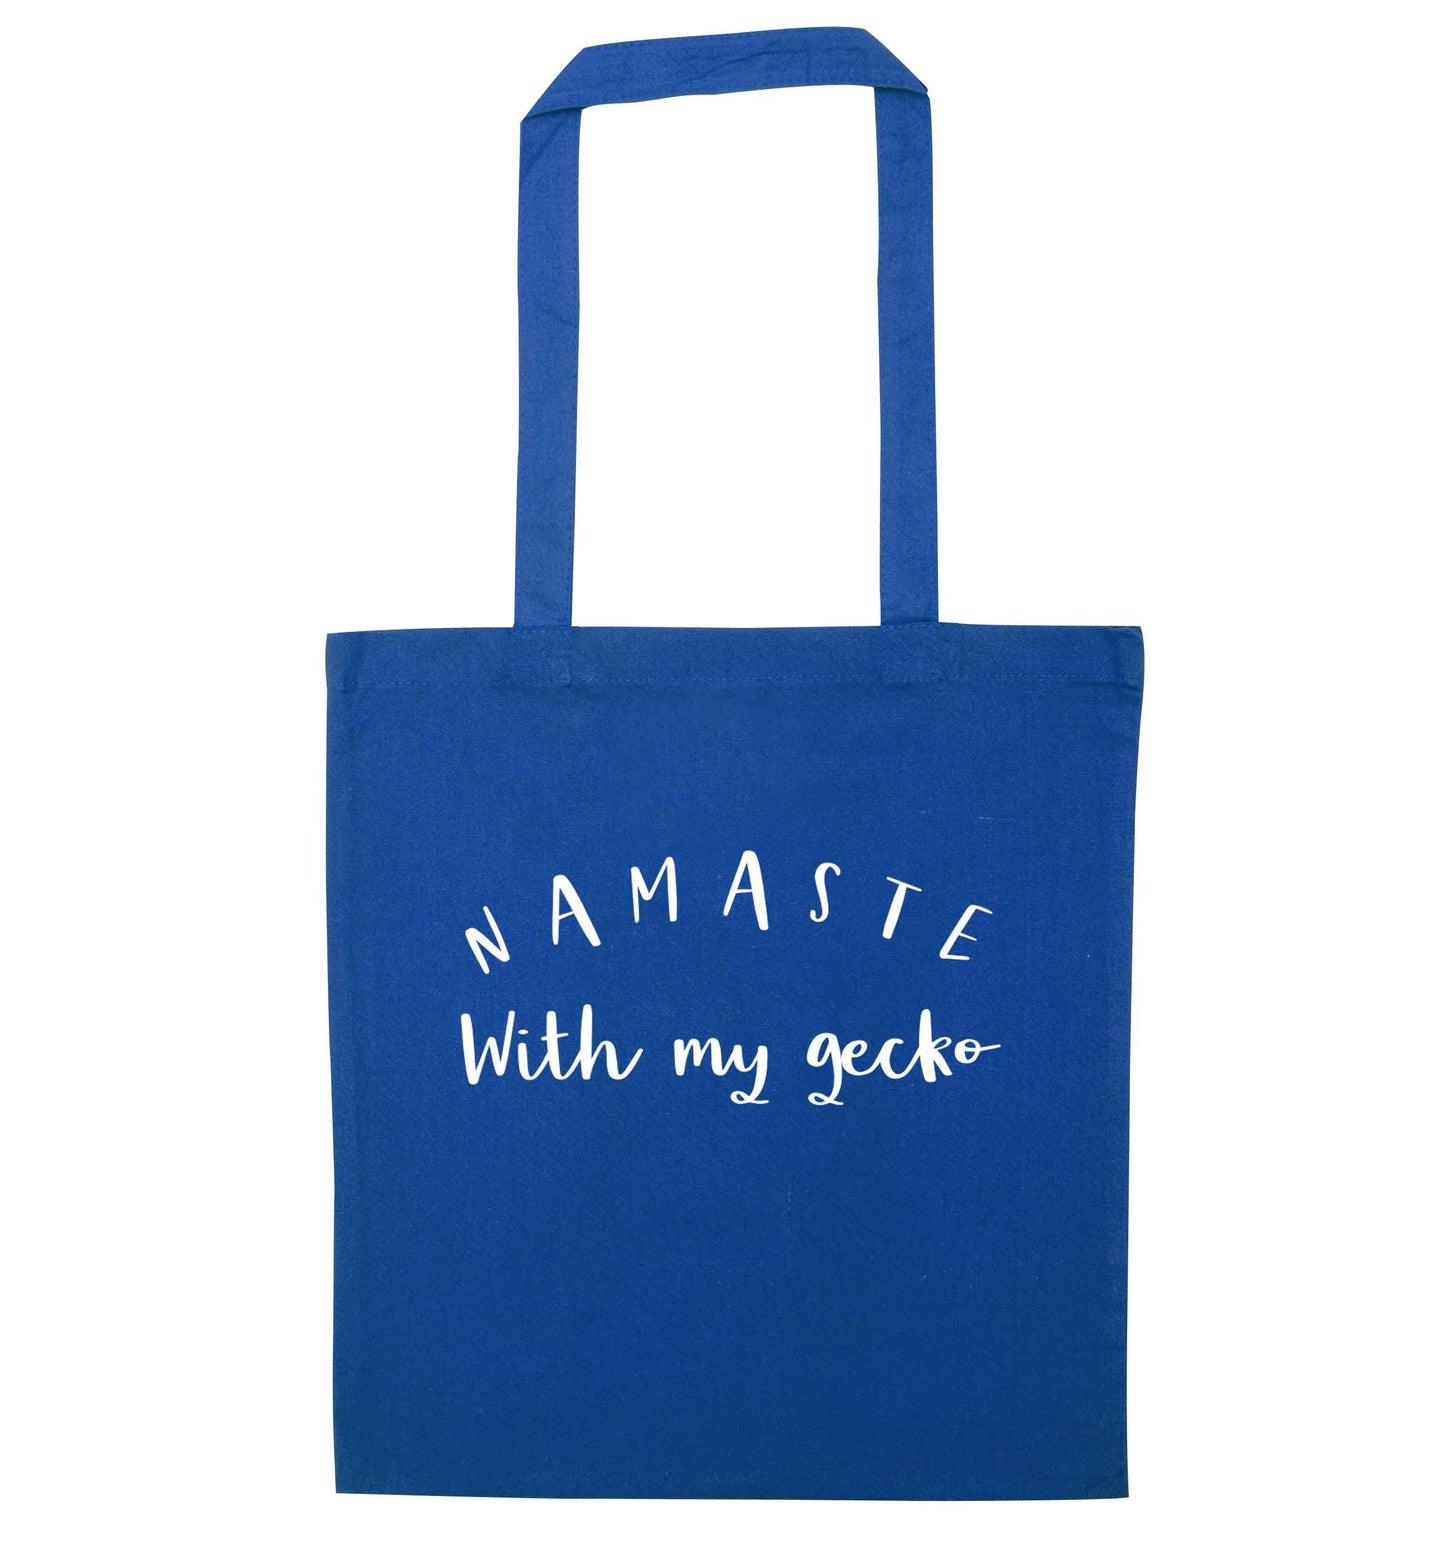 Namaste with my gecko blue tote bag